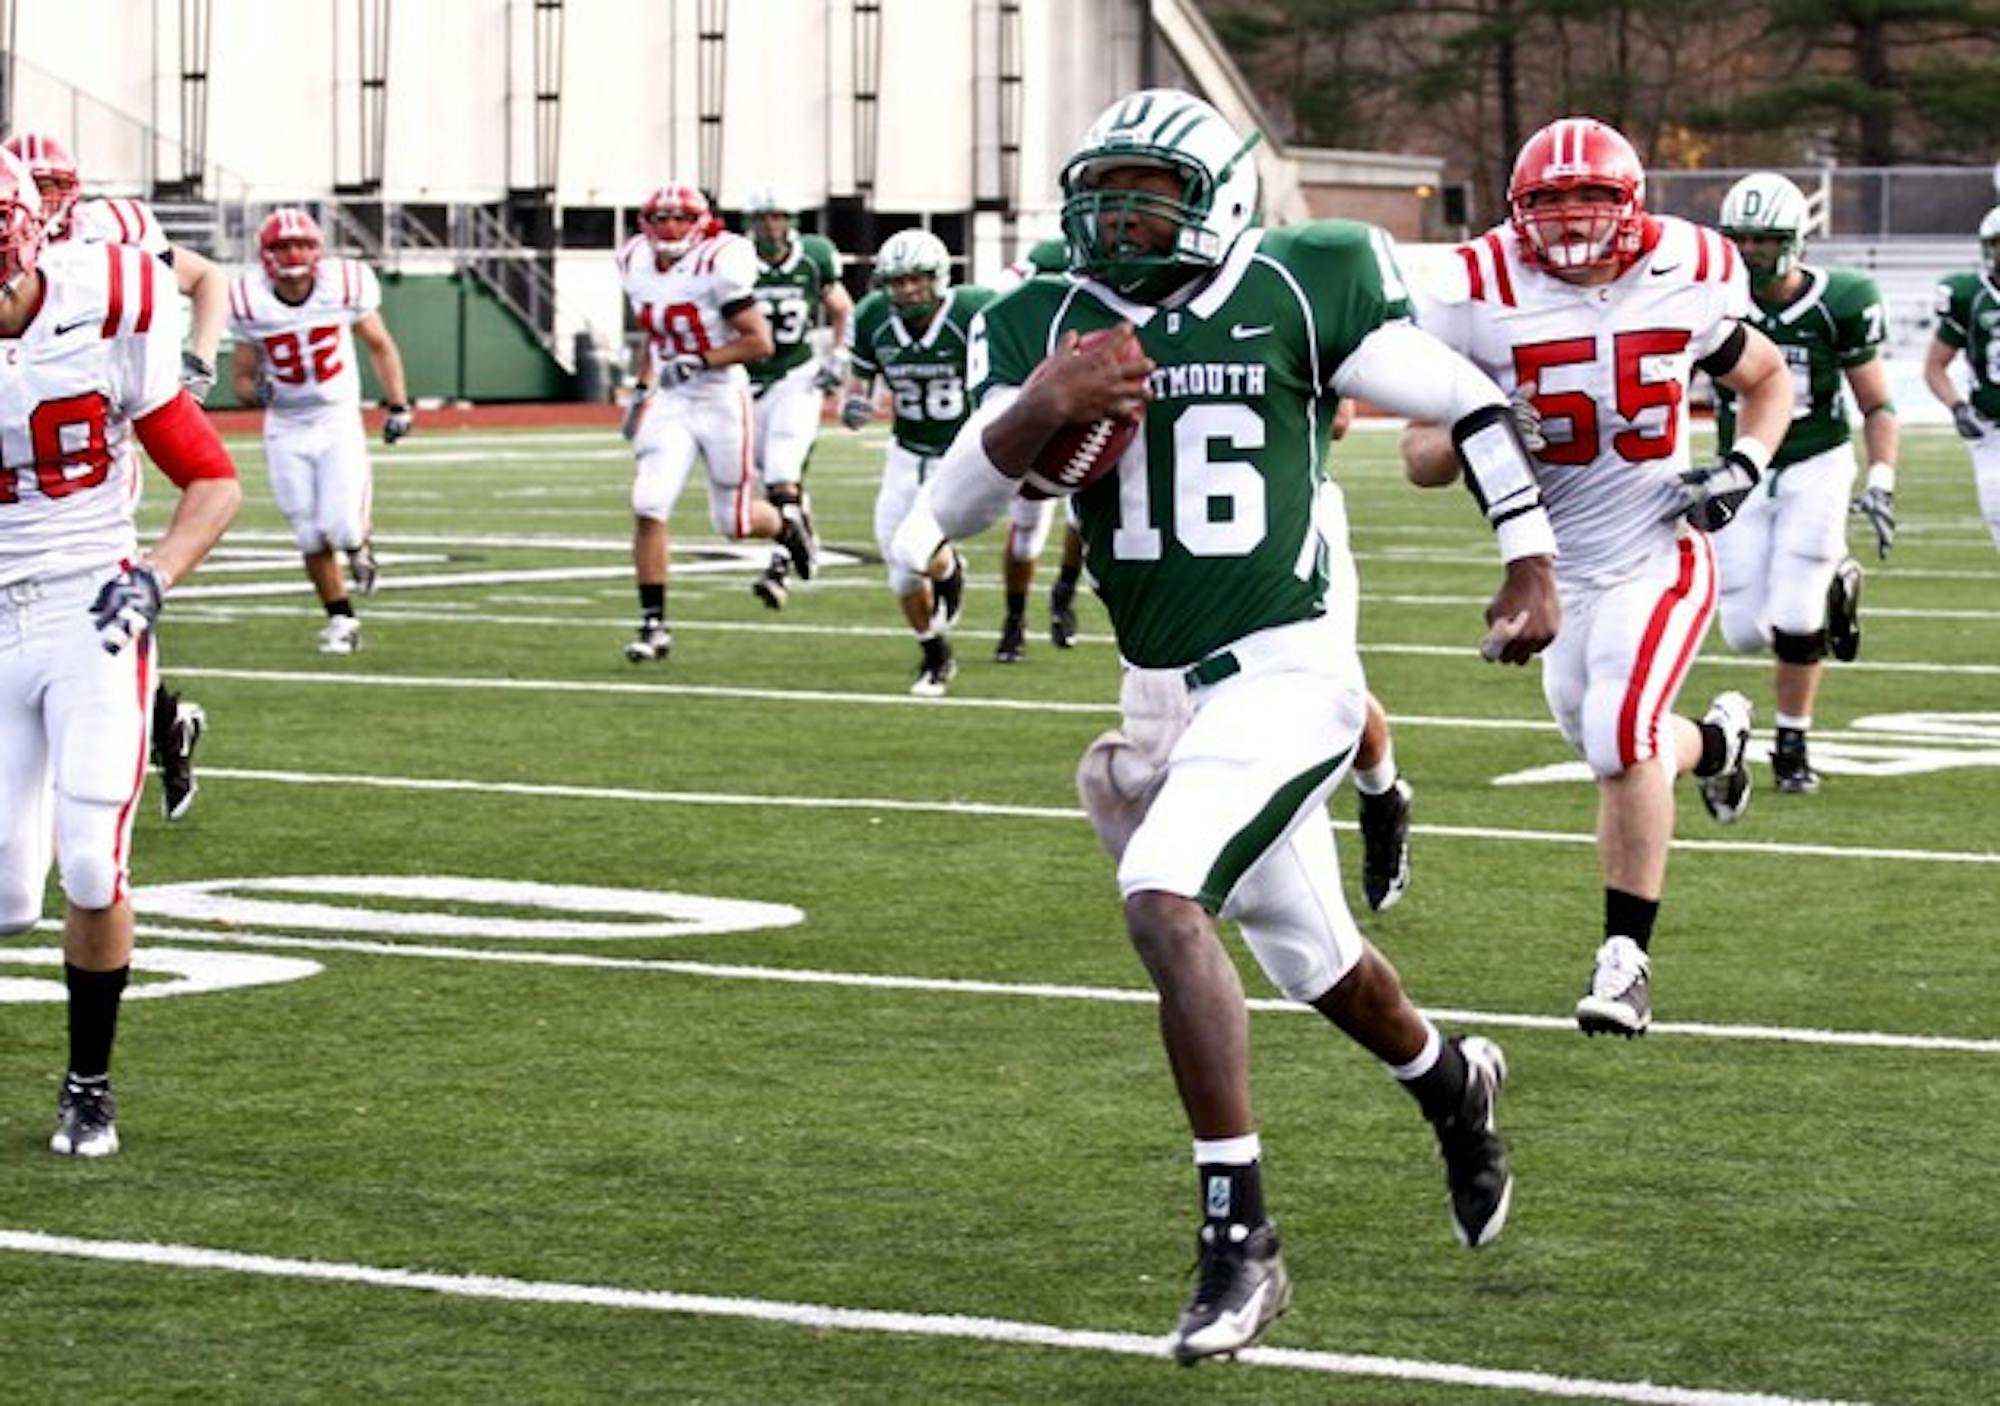 Greg Patton '13 set a new Dartmouth single-game rushing record with 243 yards during Saturday's game.